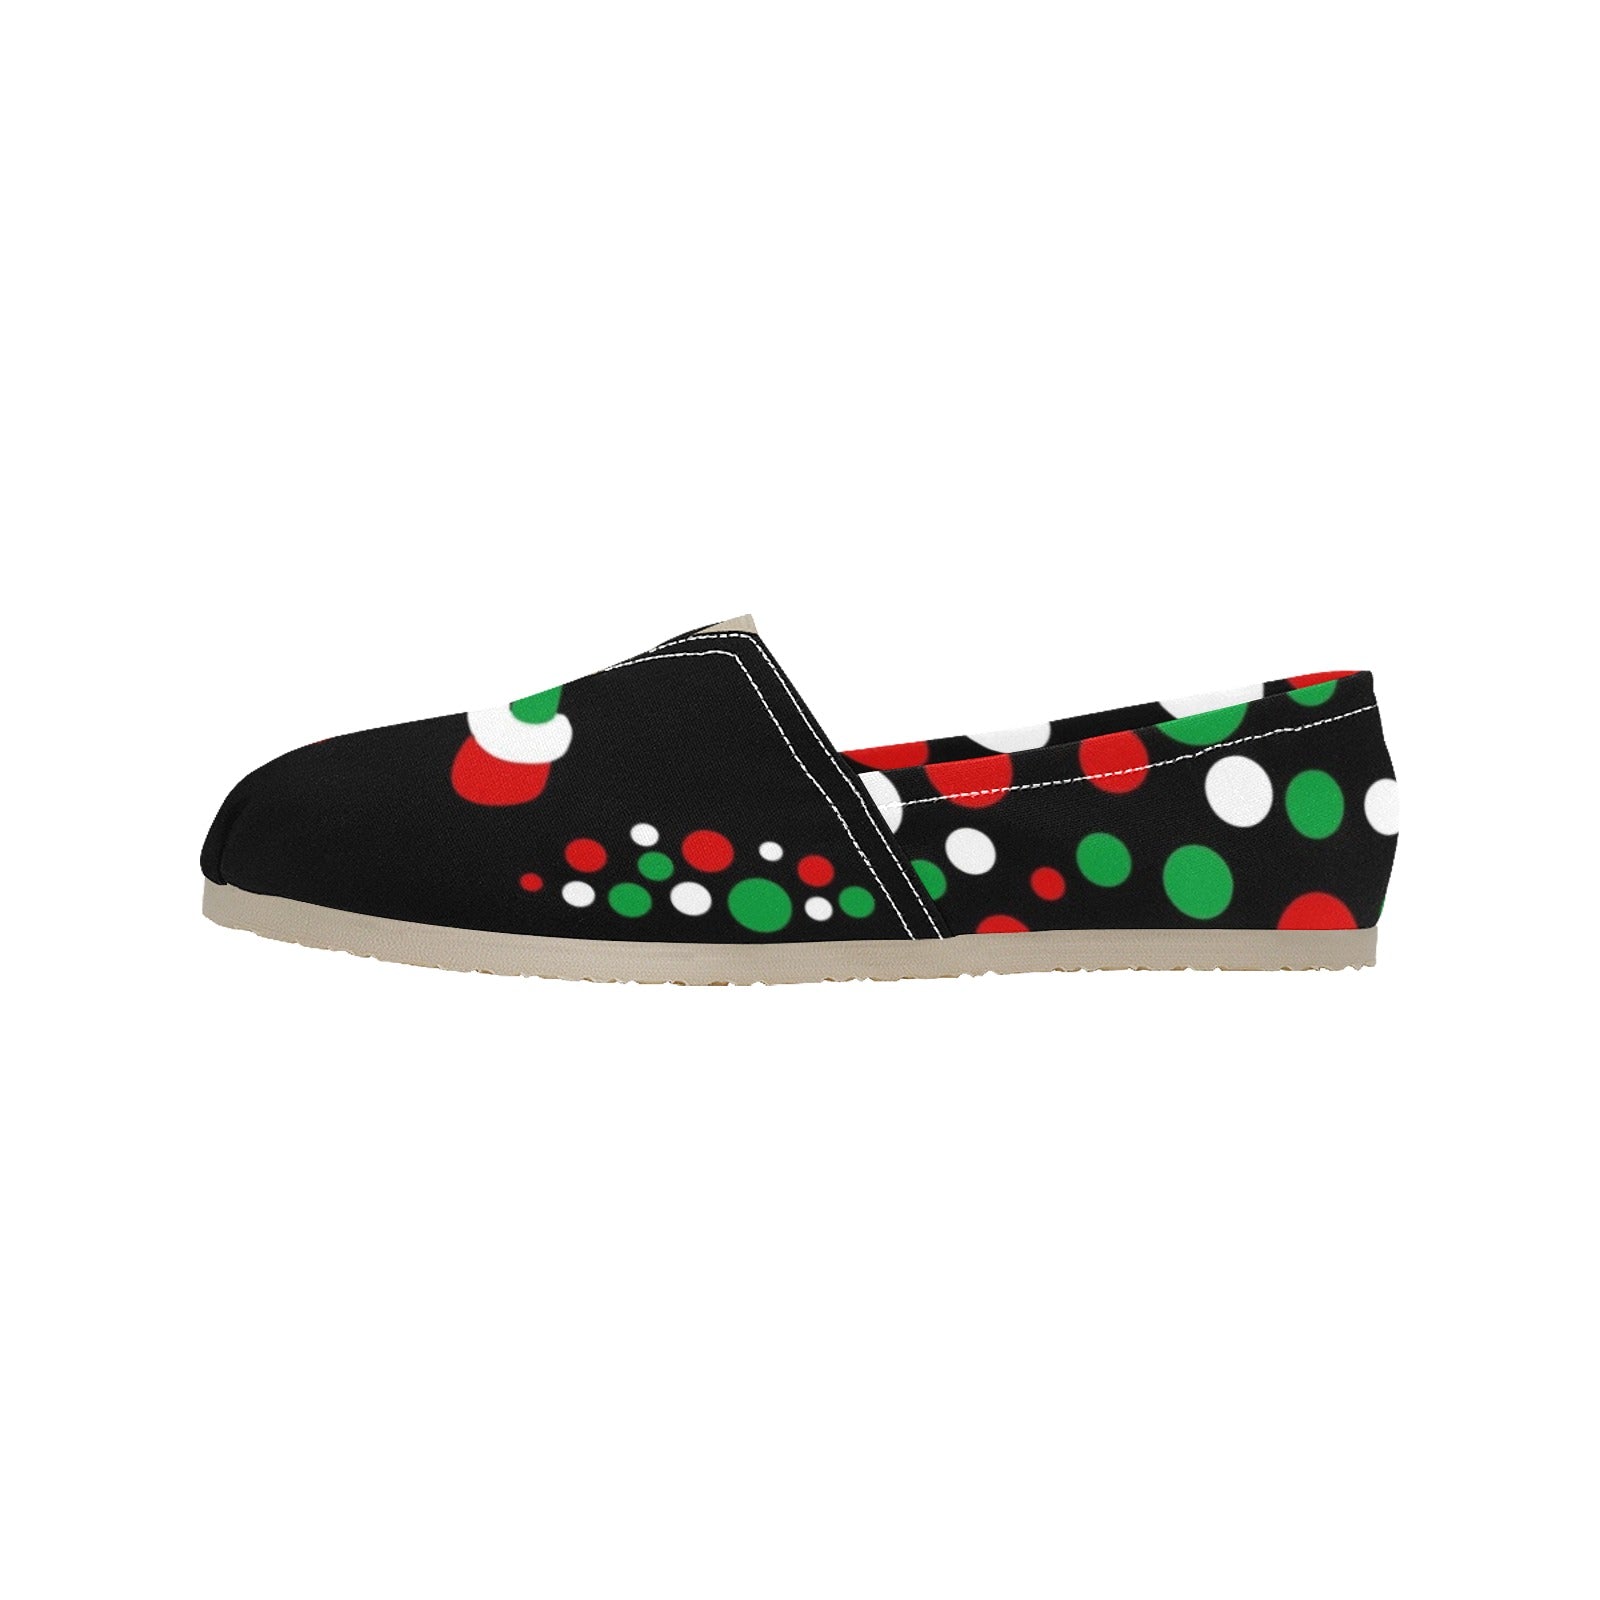 Xmas Blah - Casual Canvas Slip-on Shoes